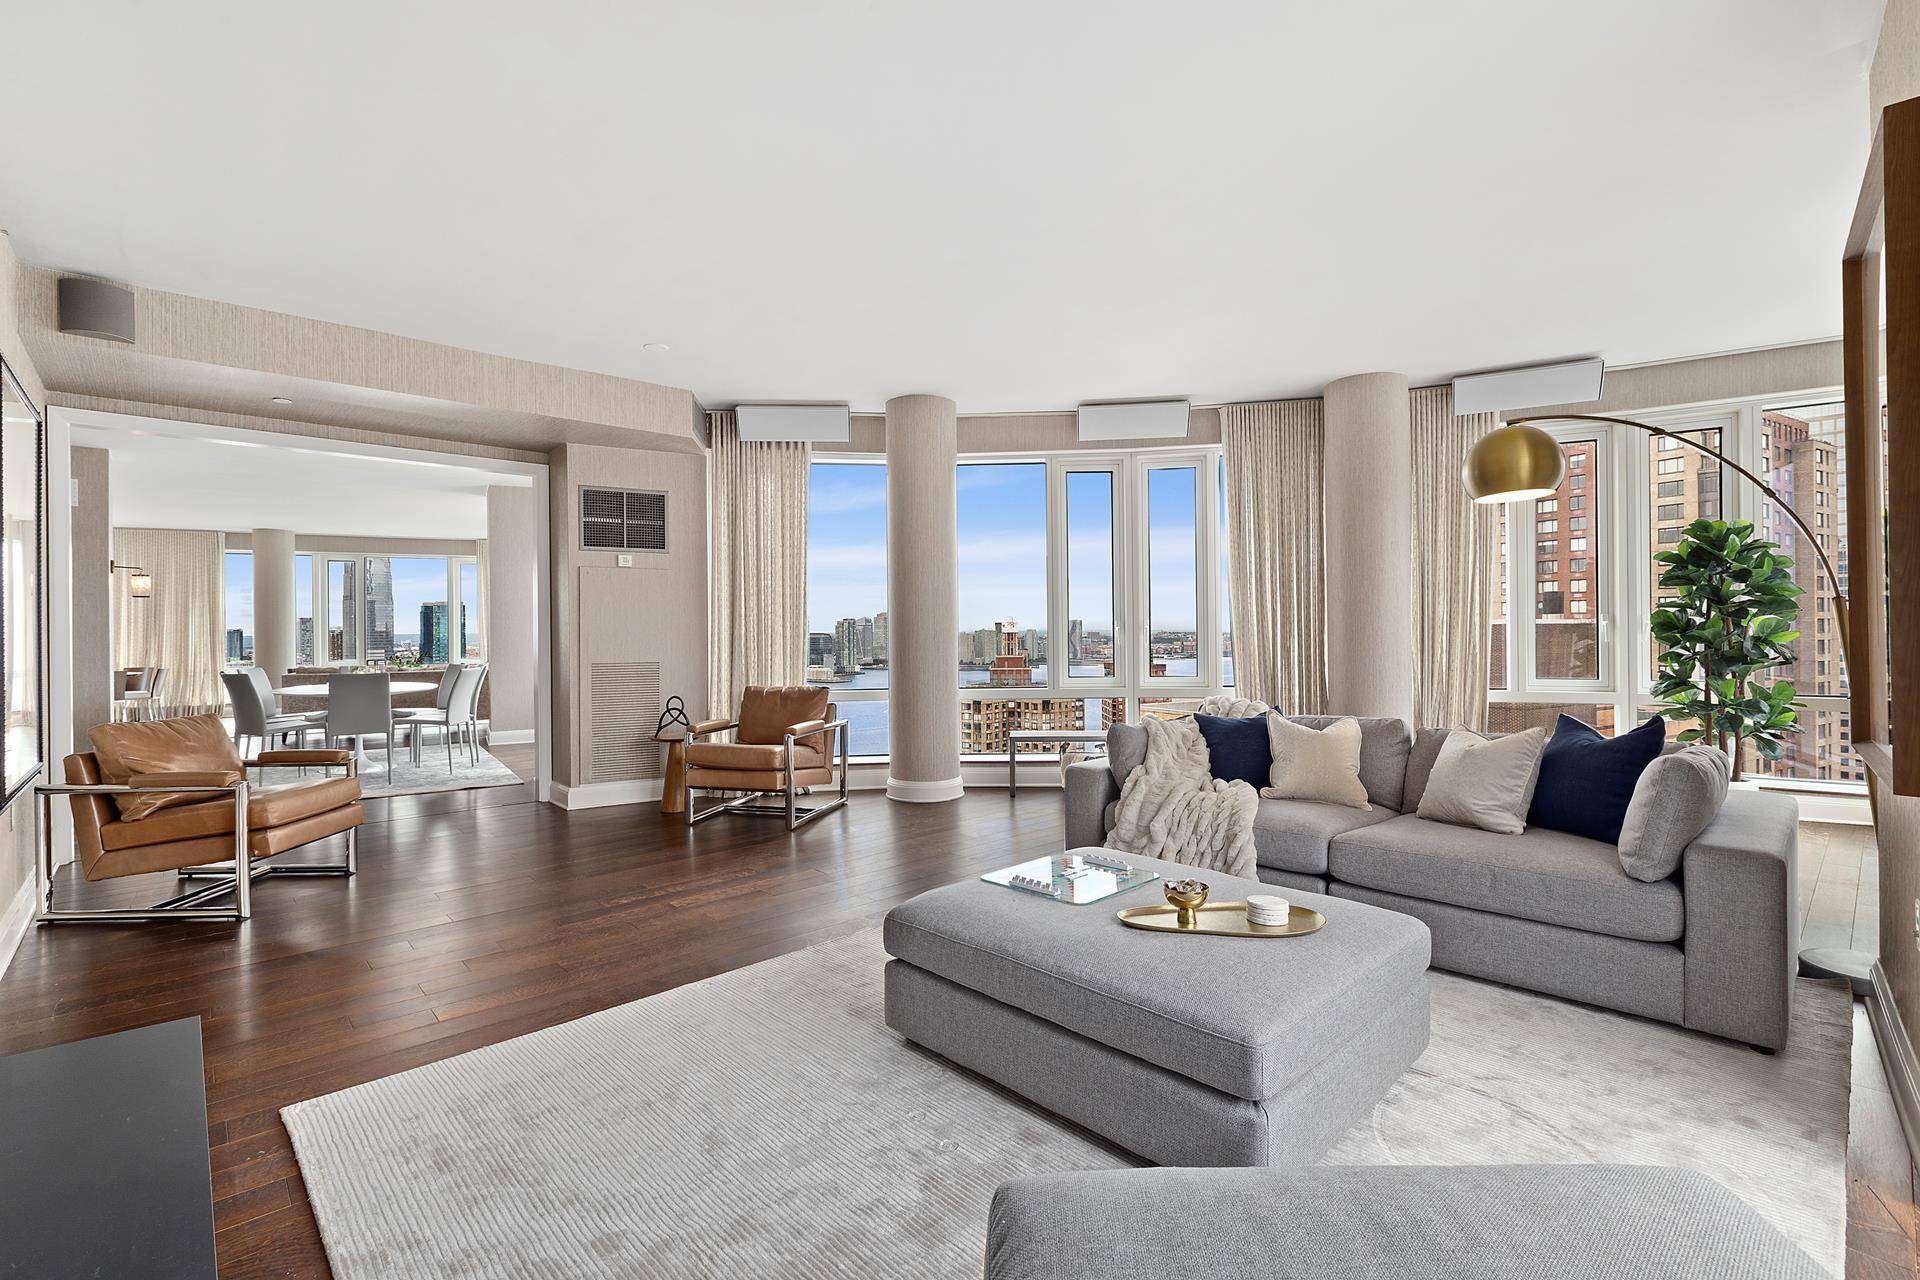 Stunning four bedroom, four bath with central air, double laundry room, enormous open kitchen and twenty four hour doorman moments from One World Trade !